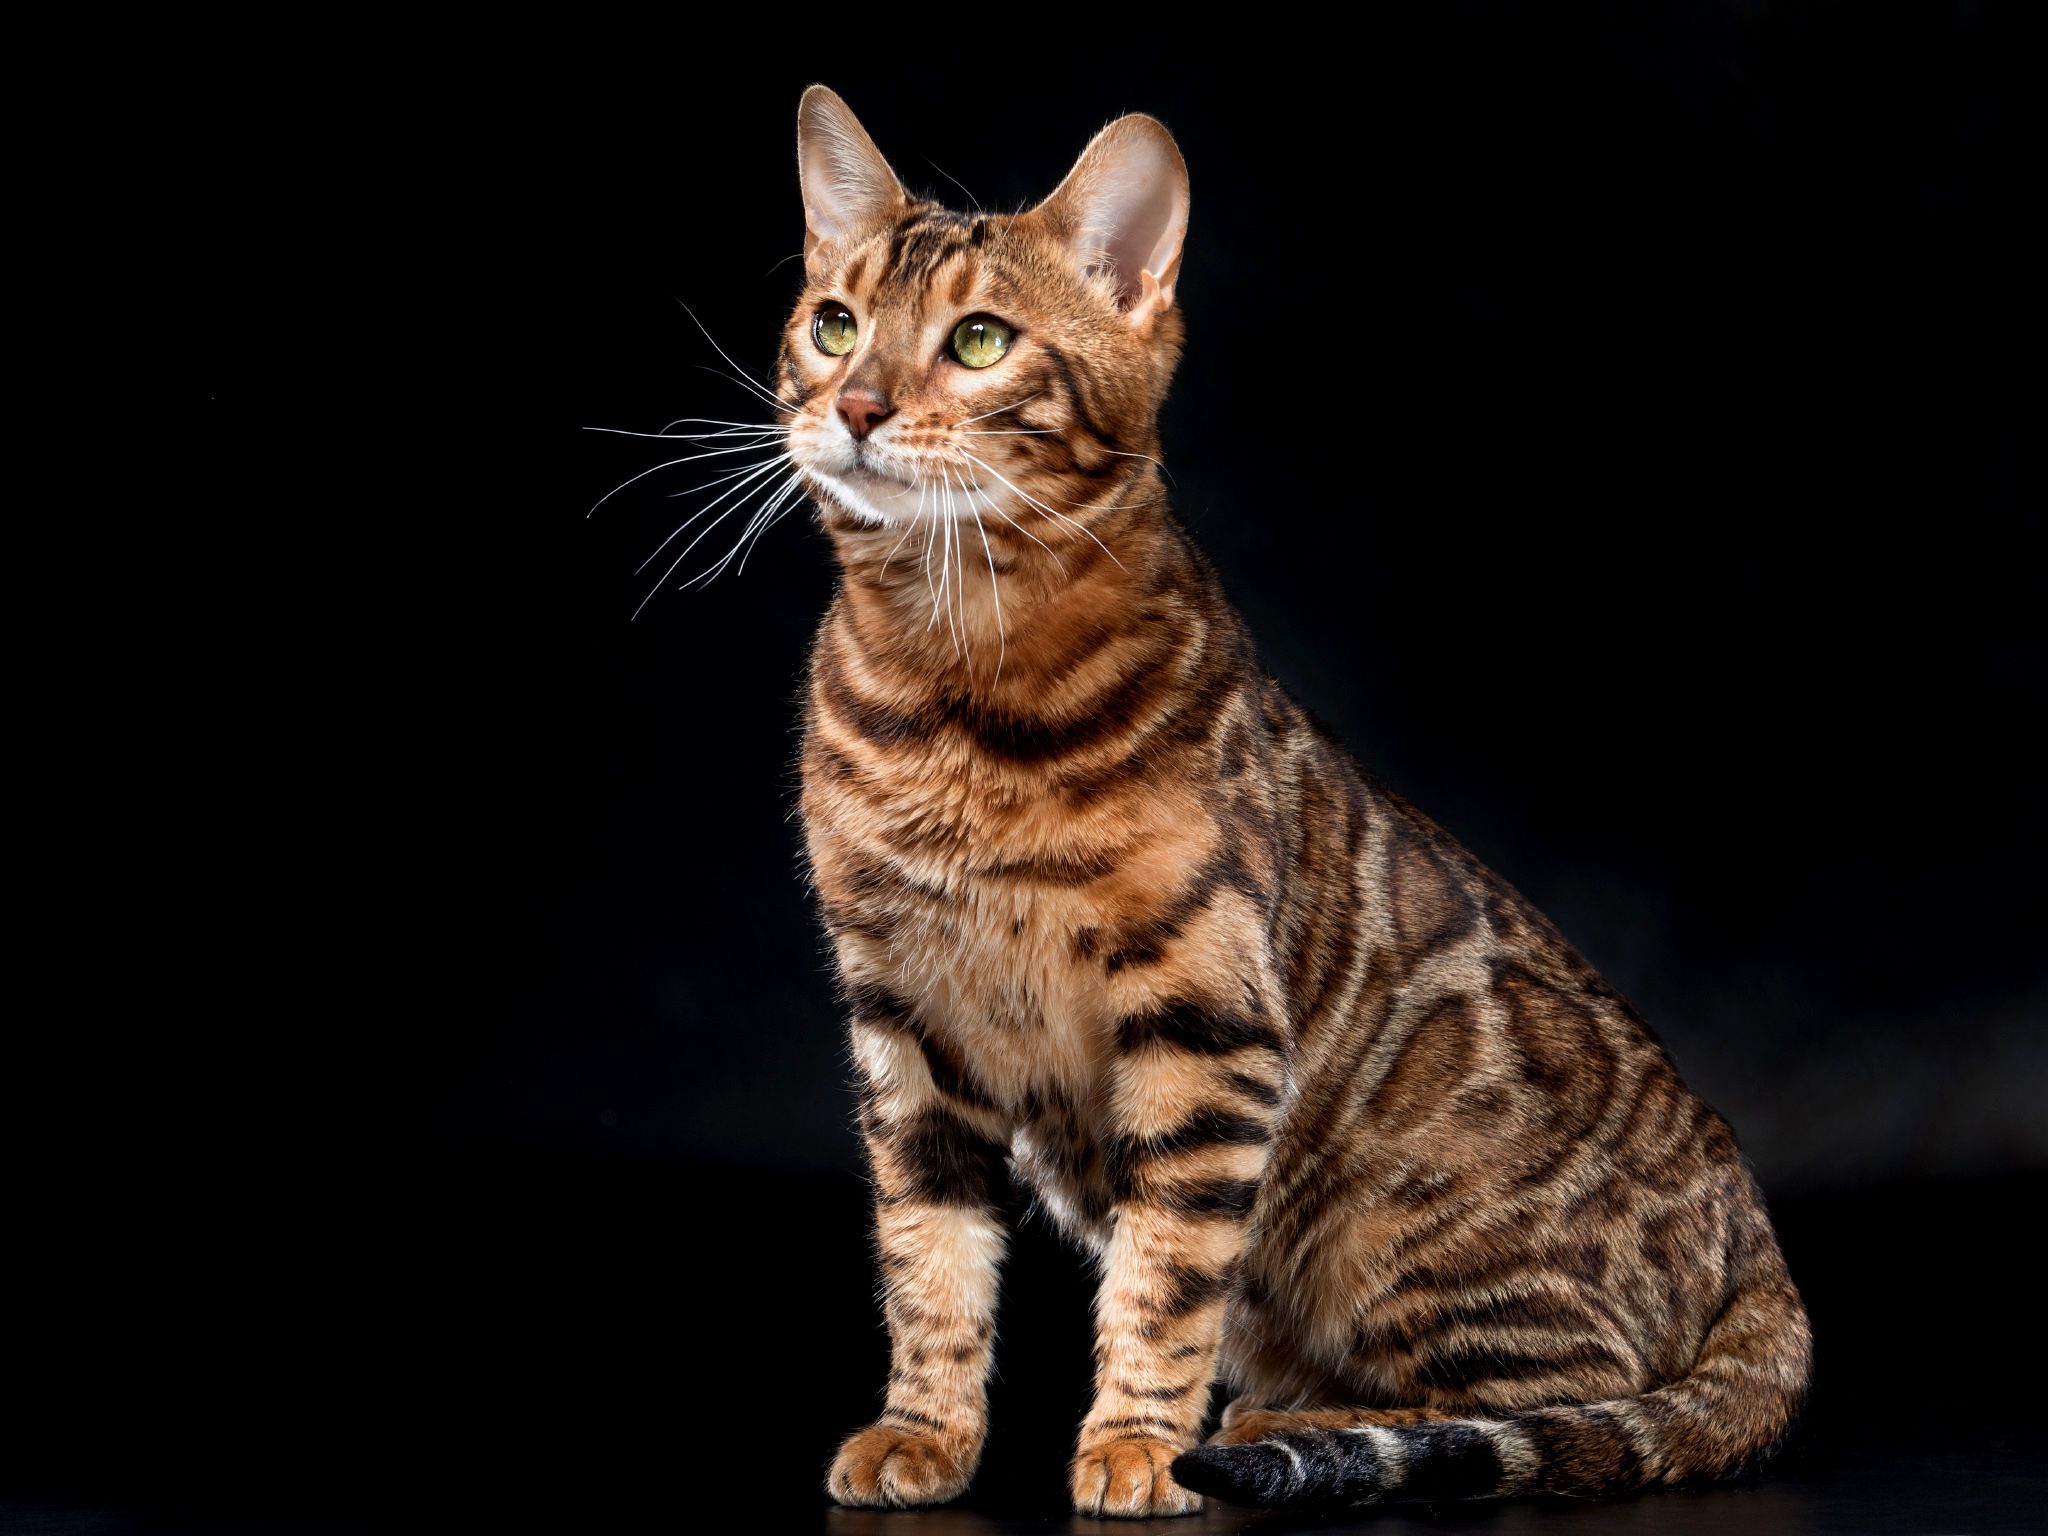 Bengal Cat sitting in an isolated black background